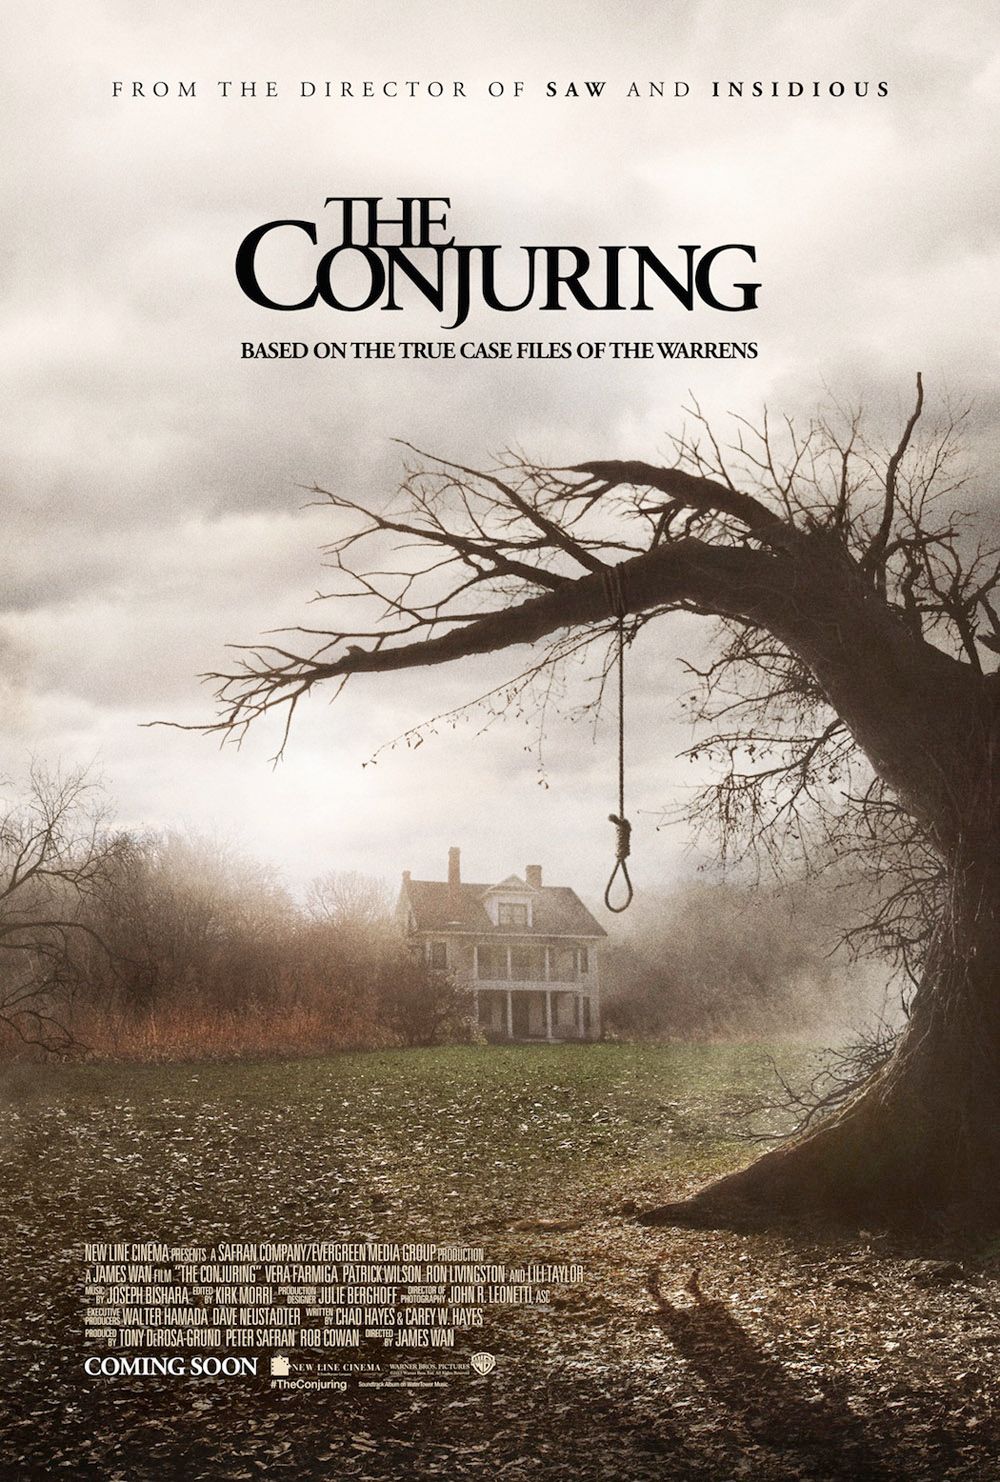 The Conjuring shines with $41.5 million collection in its opening weekend